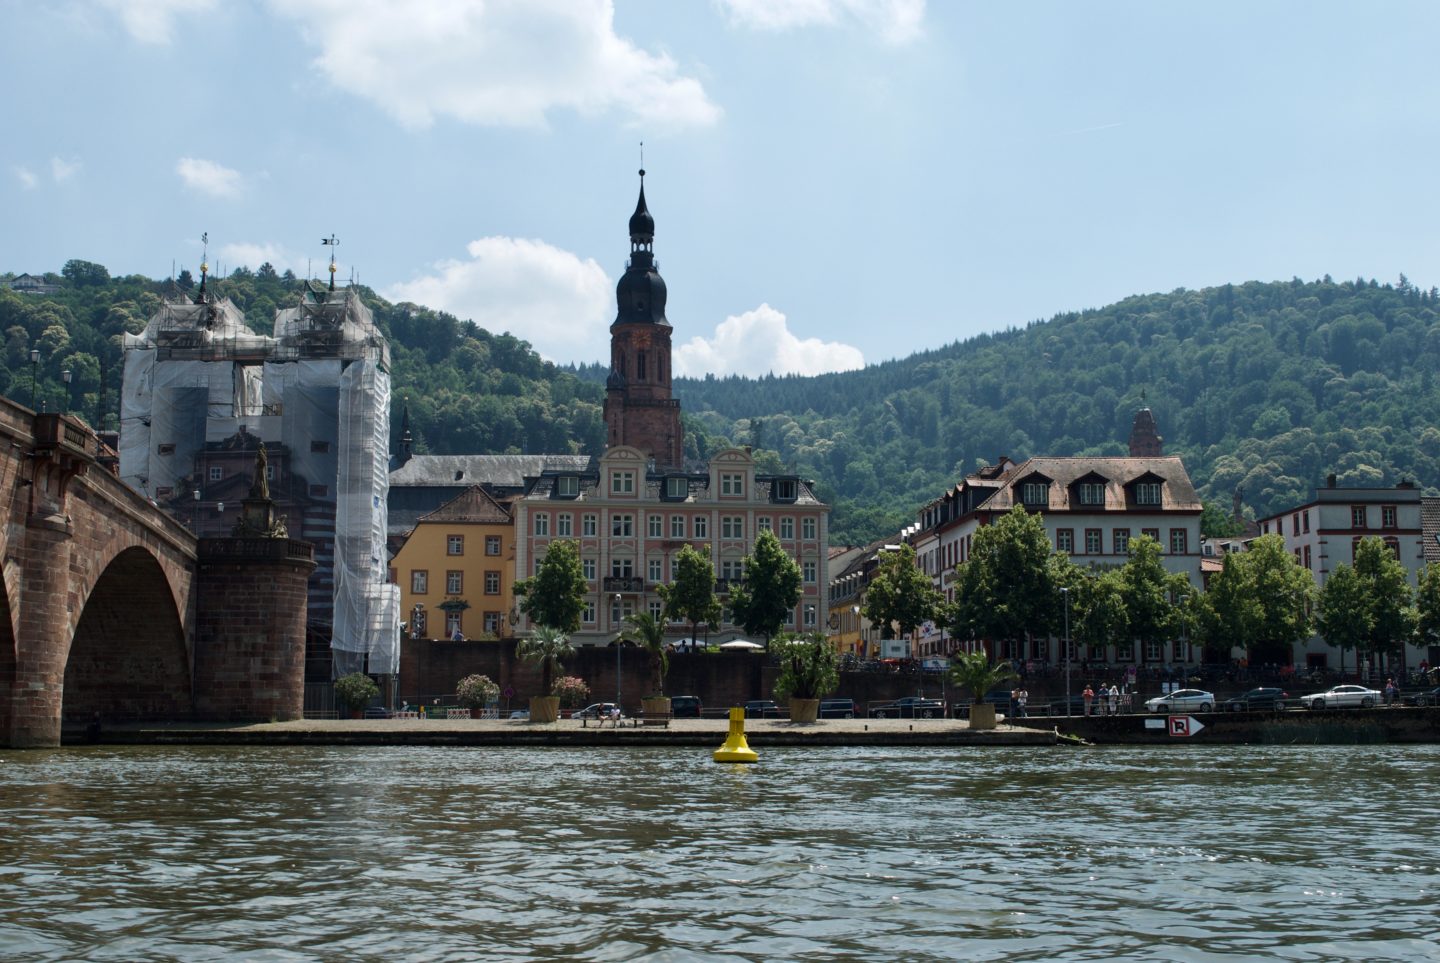 The view of the Old Bridge and Old Town from one of the little motorboats on the Neckar. 